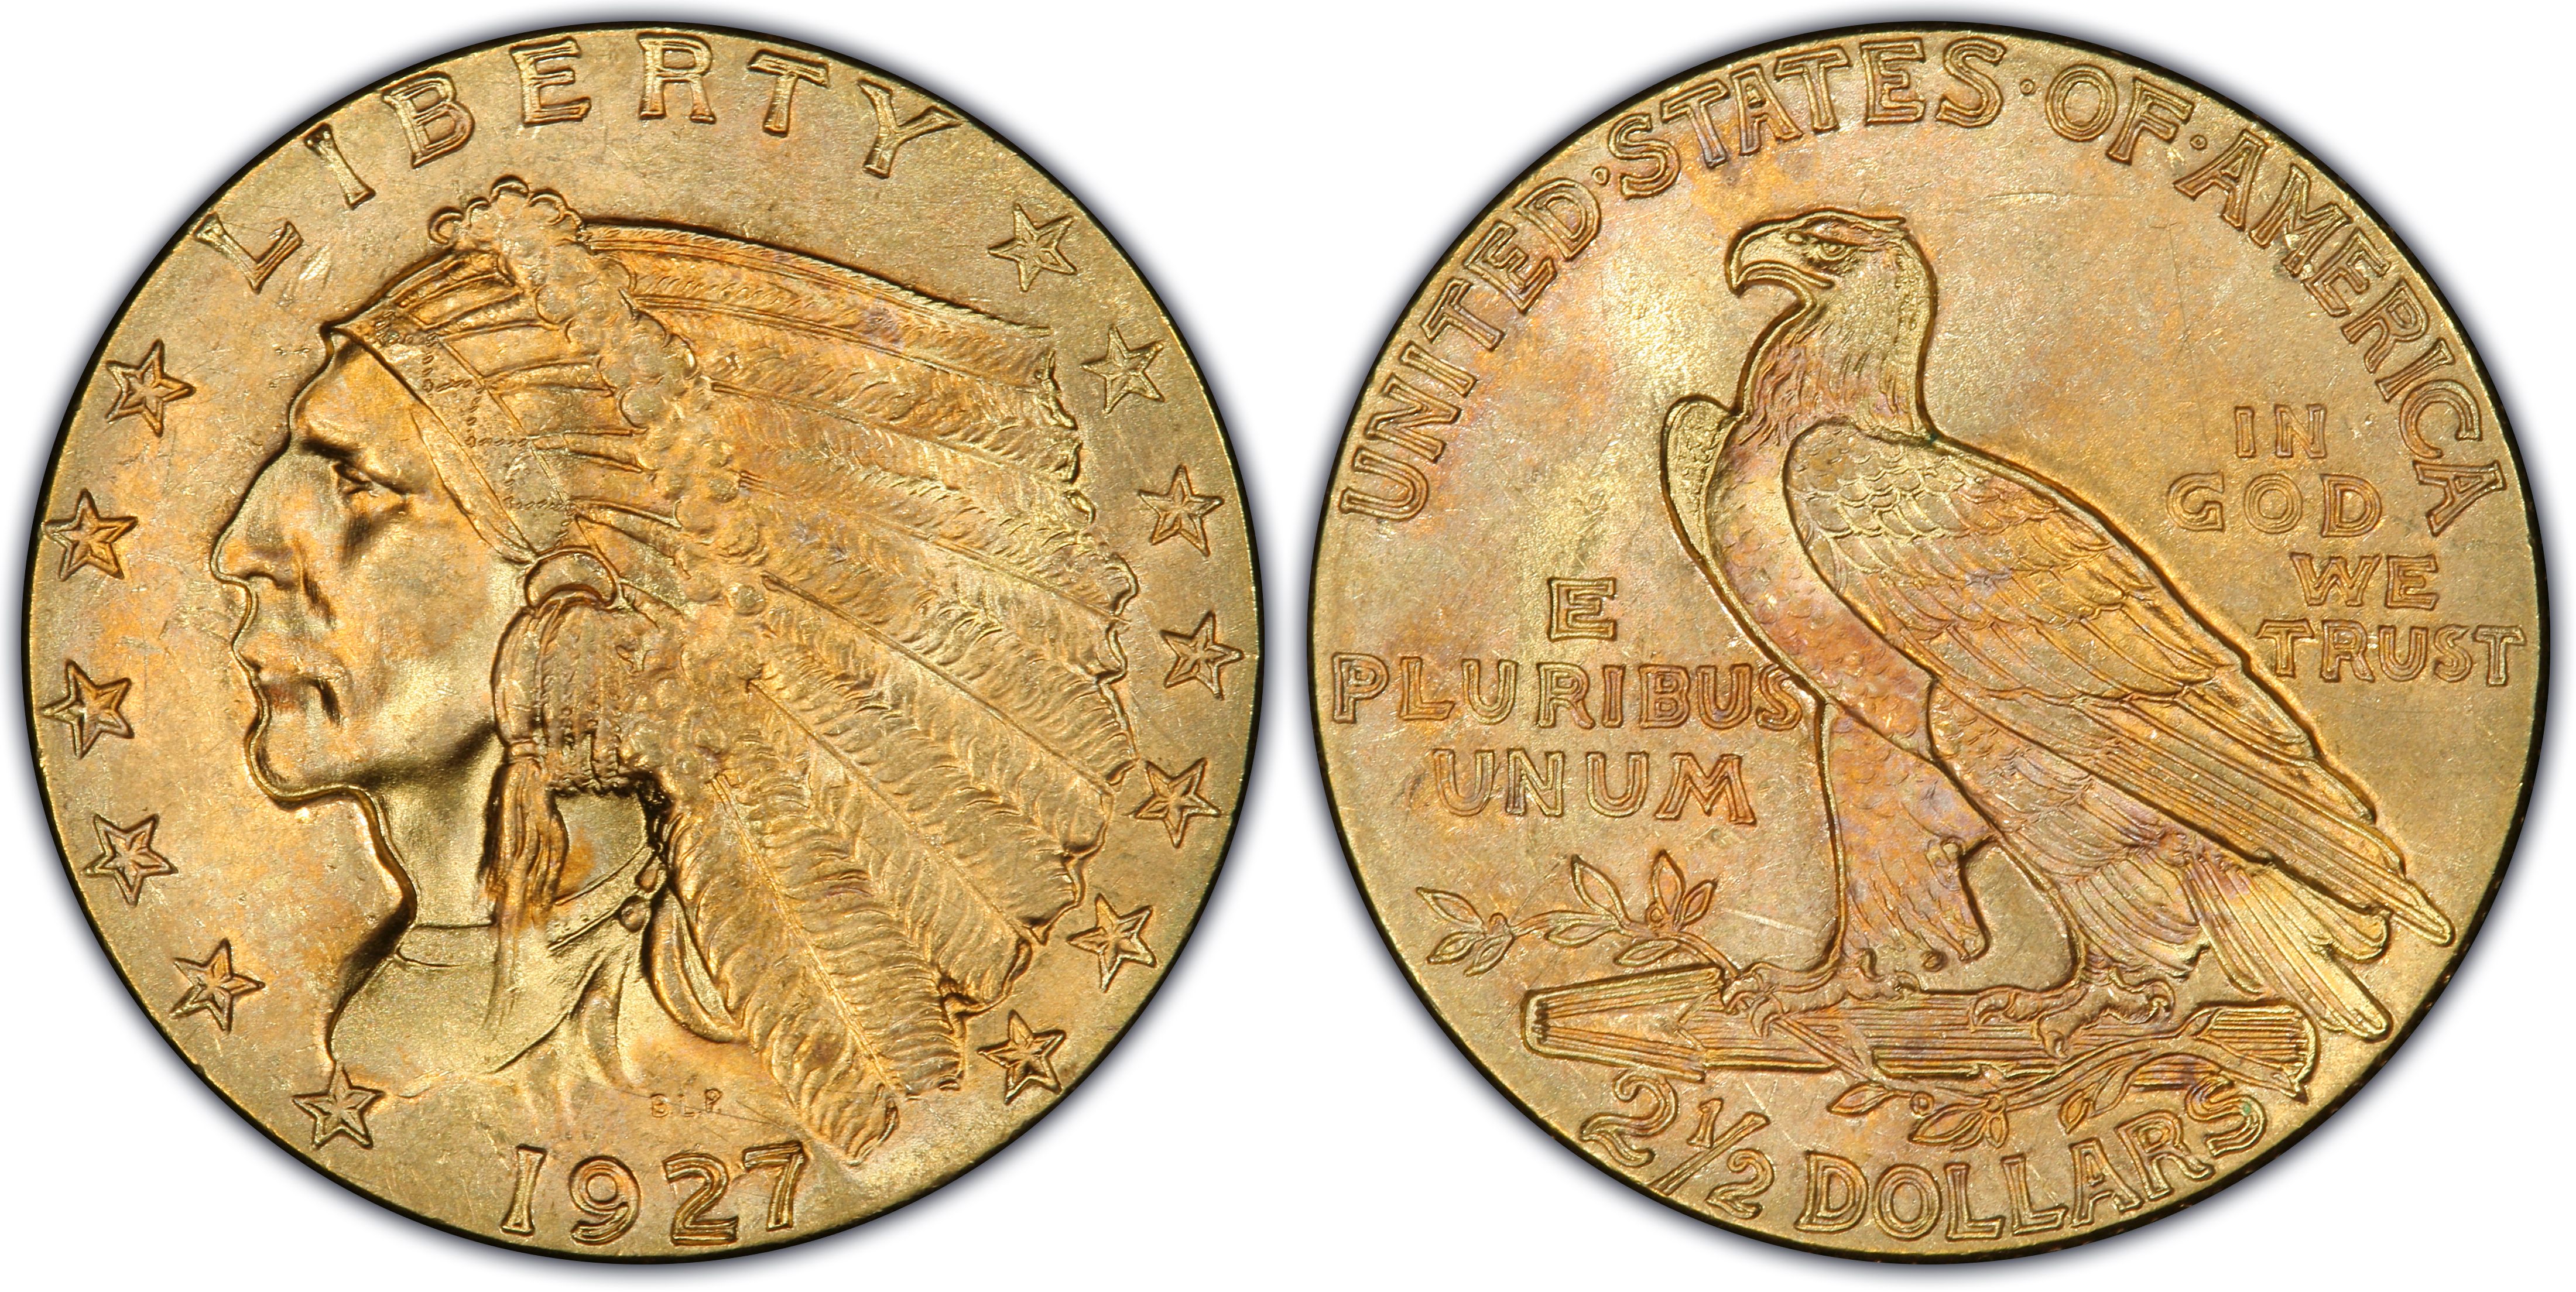 1927 $2.50 (Regular Strike) Indian $2.5 - PCGS CoinFacts